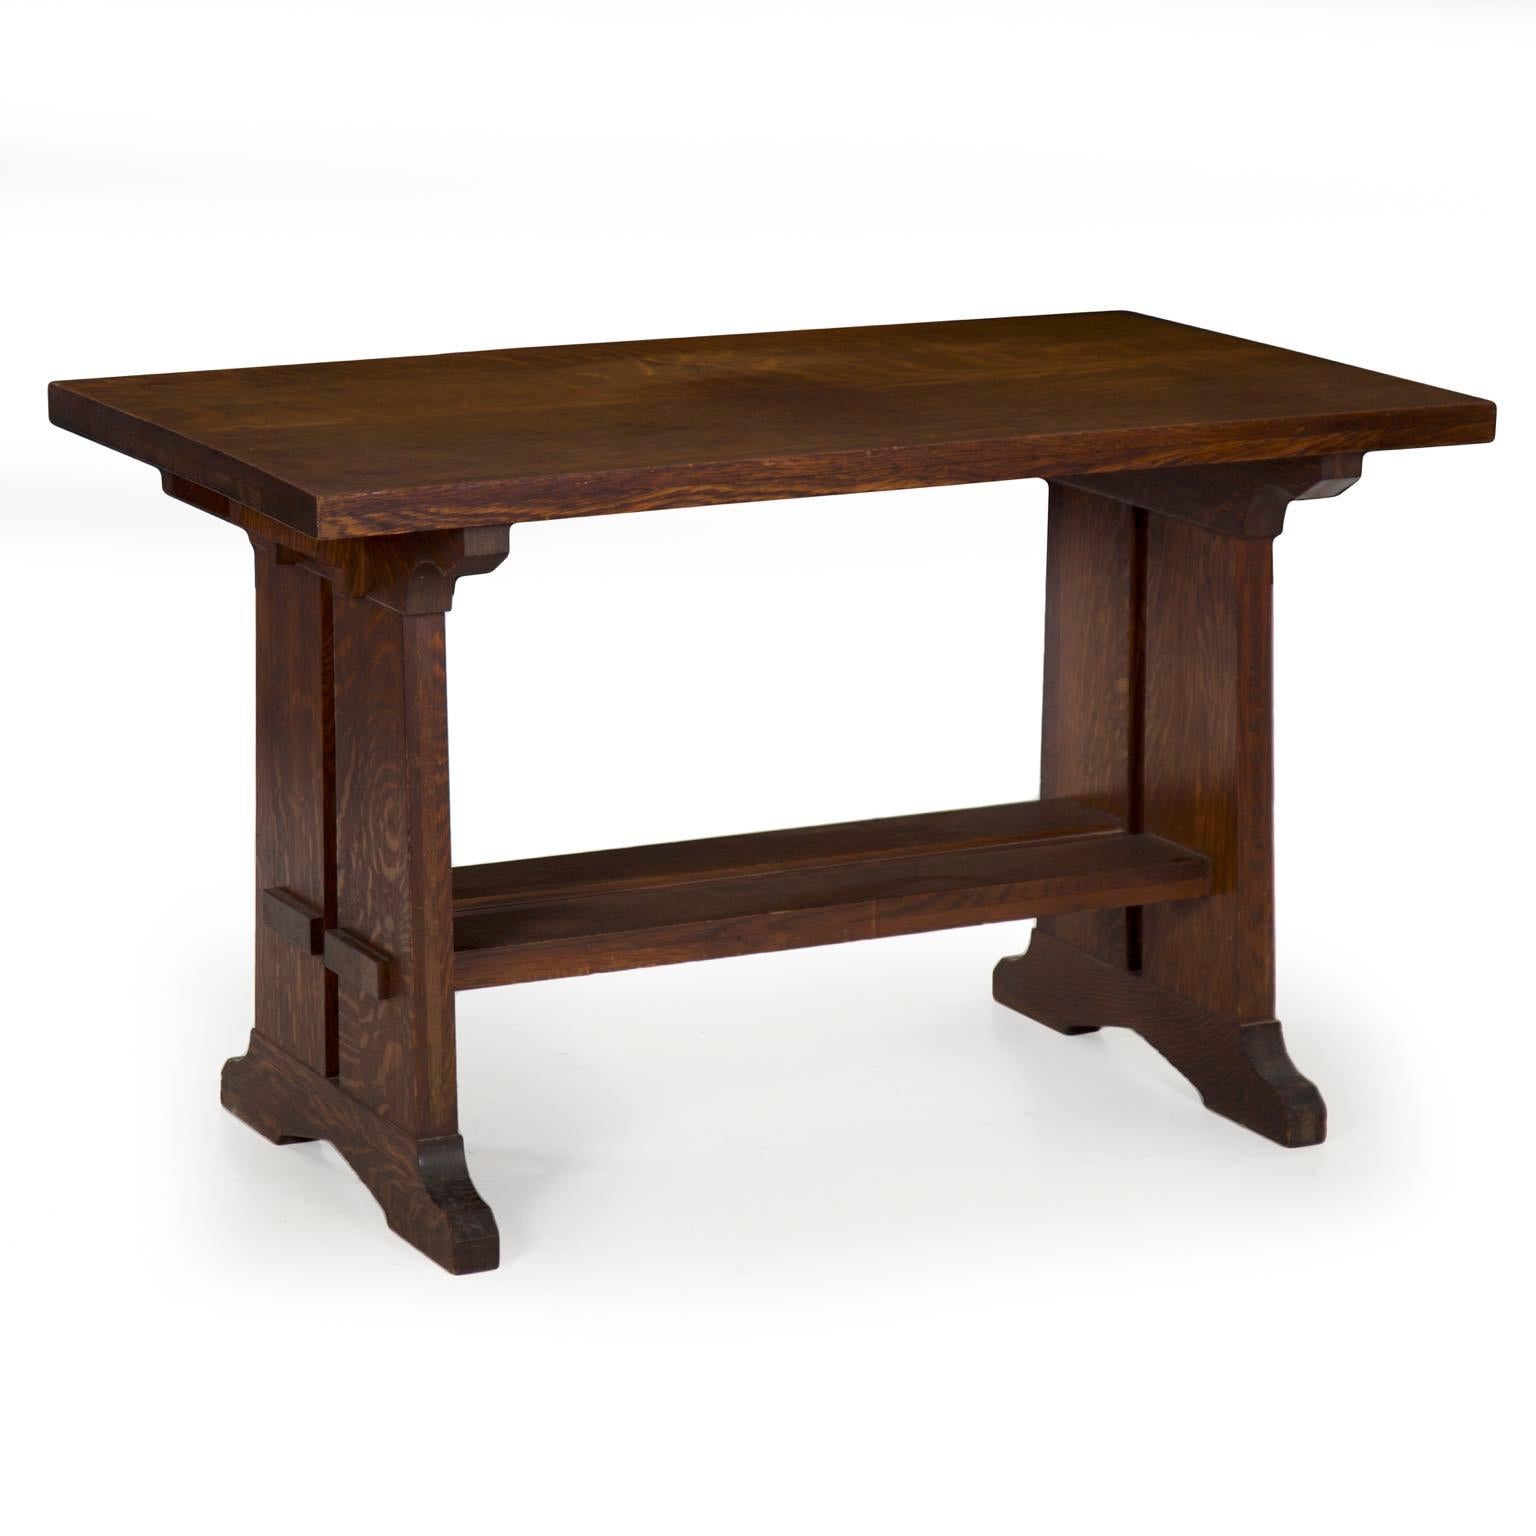 This angular writing table is an angular and austere product of the Arts & Crafts movement retaining an old finish that has oxidized nicely with time. The rectangular top is plain and unembellished, resting over scroll-cut capitals tenoned on thick